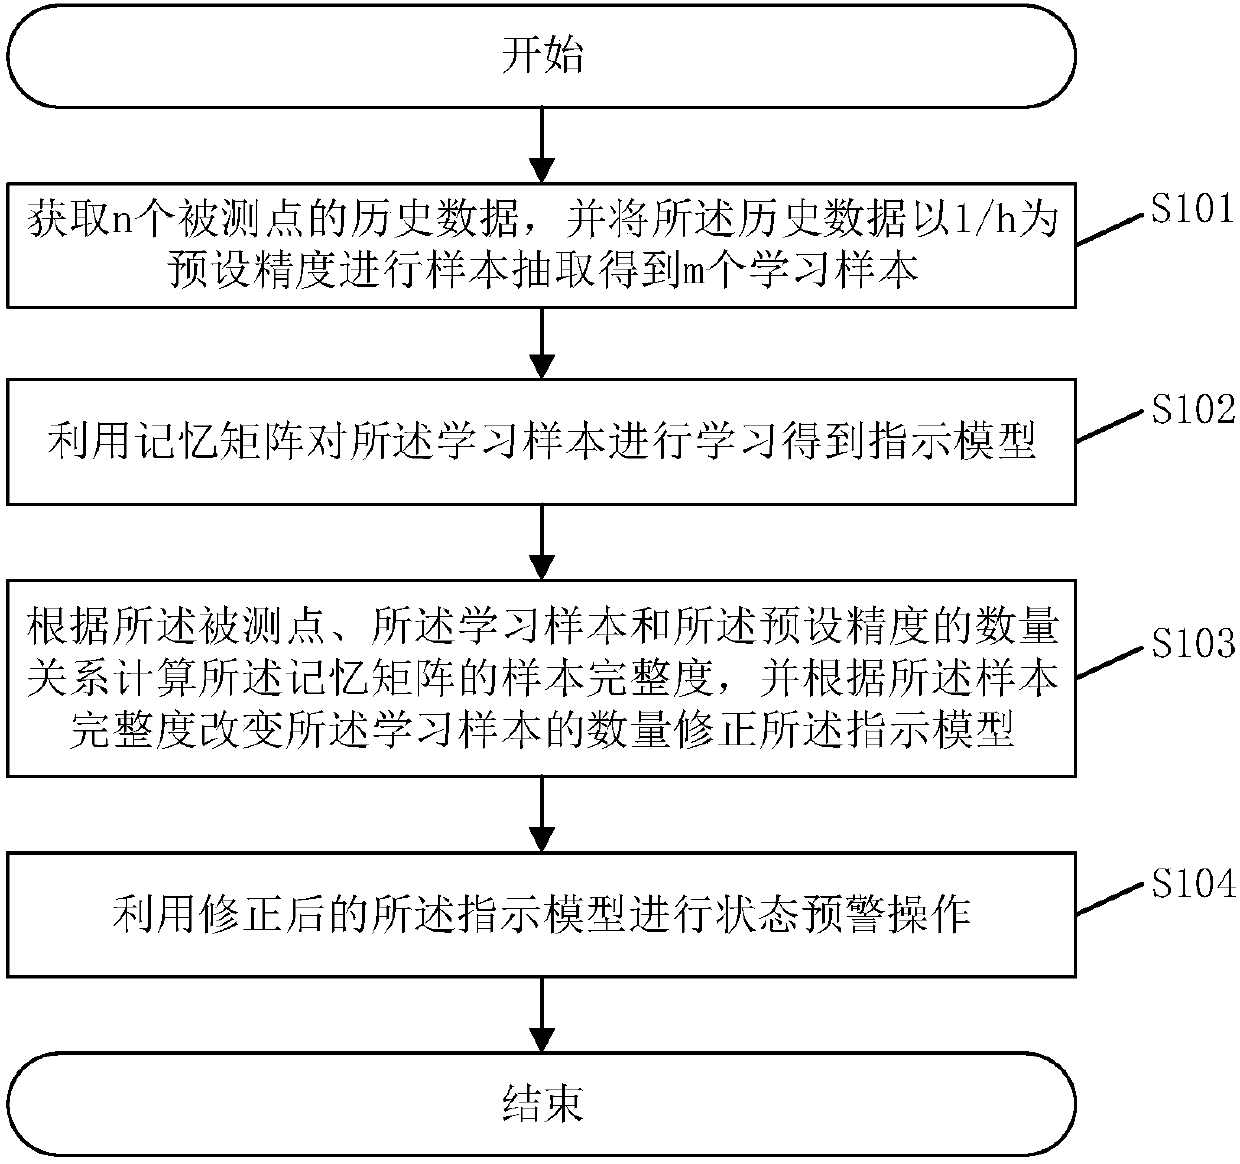 Thermal power equipment-based state early warning method and system